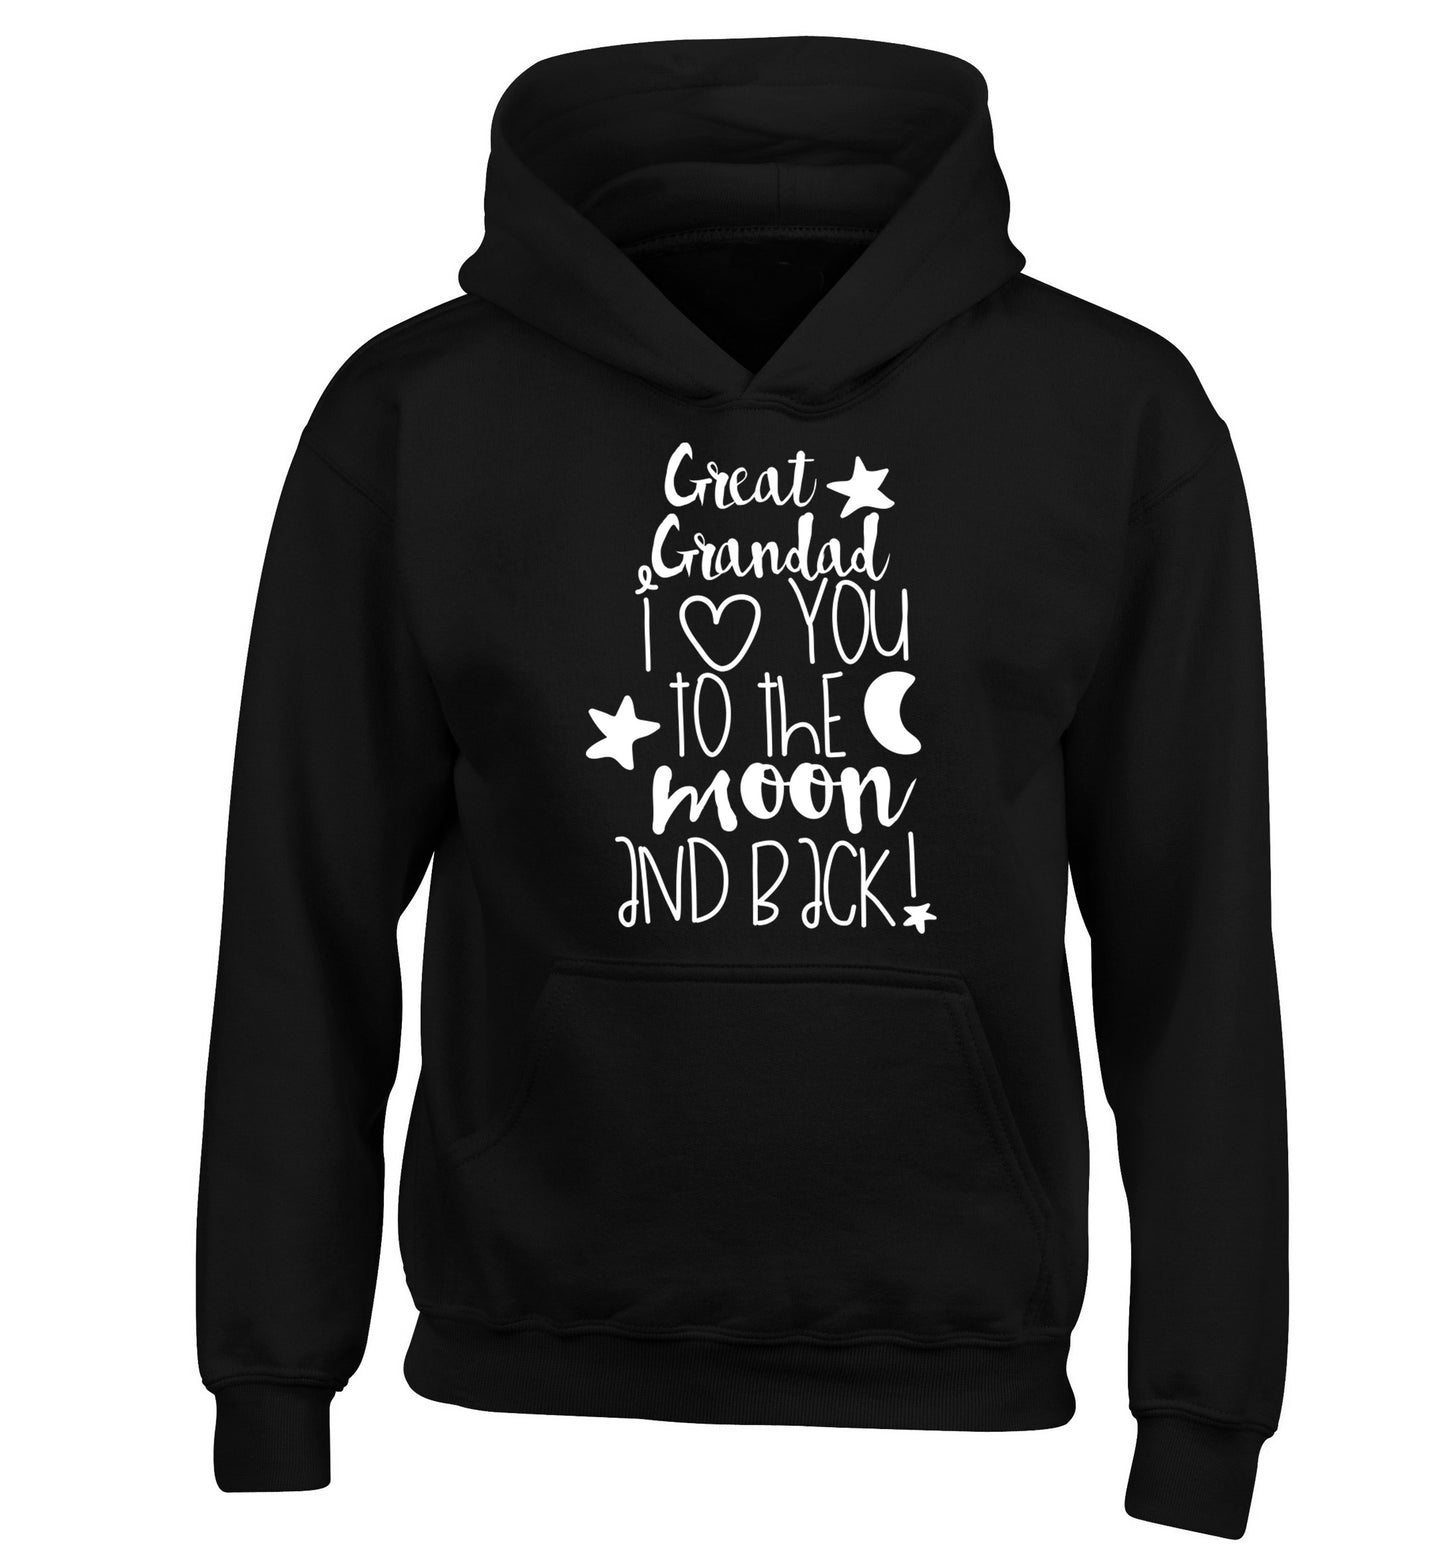 Great Grandad I love you to the moon and back children's black hoodie 12-14 Years